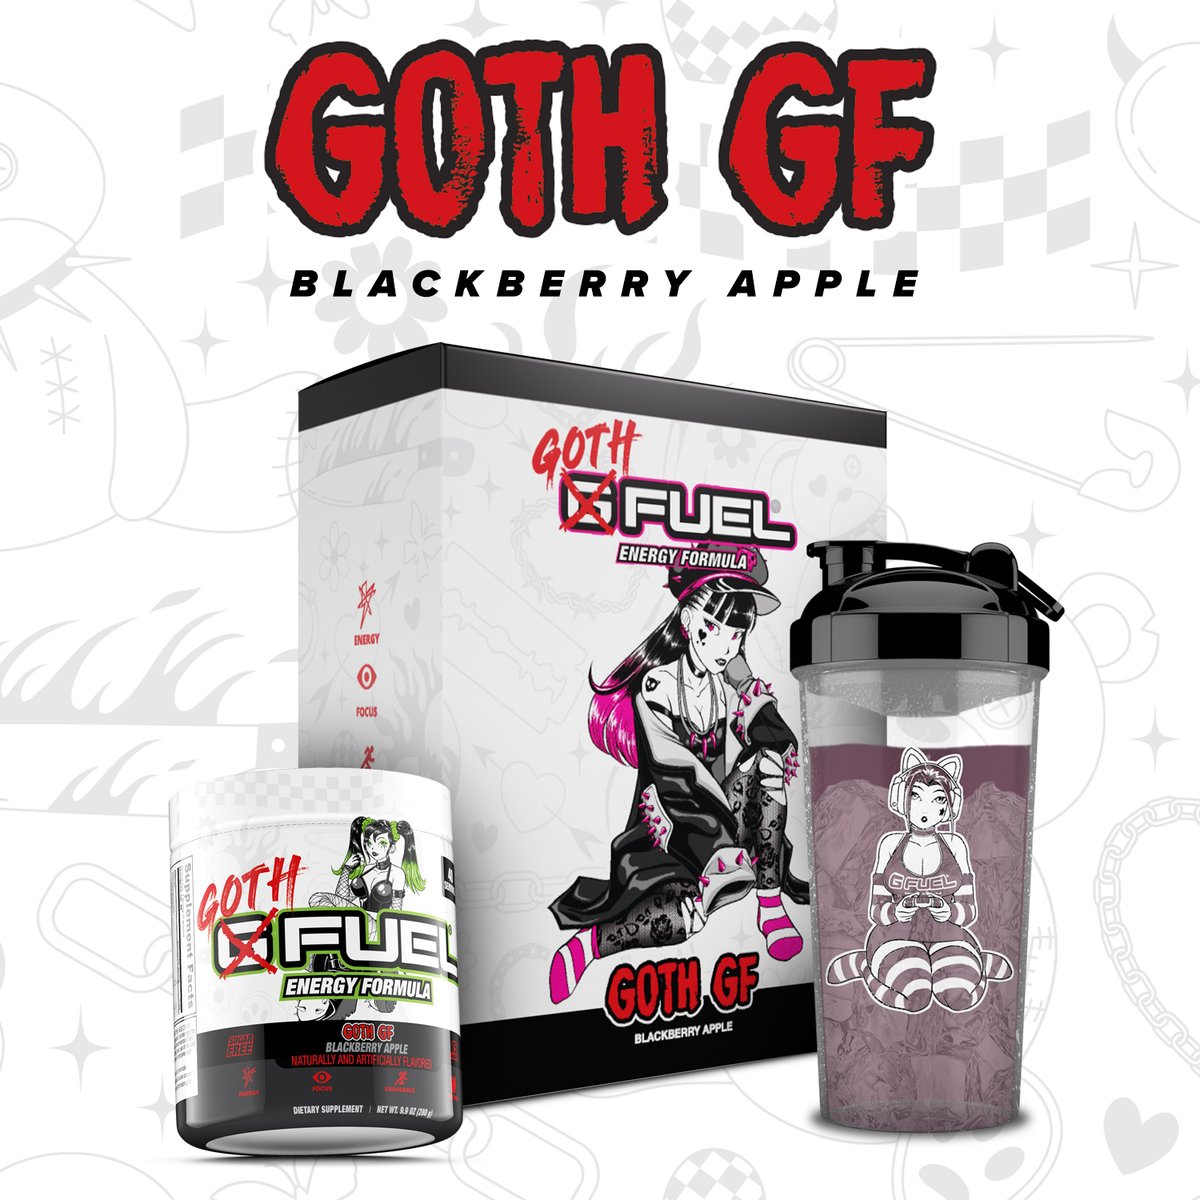 ❤️ RT + FOLLOW to win a Blackberry Apple #GFUEL 'GOTH GIRLFRIEND' Collector's Box! 💋 2 winners picked tomorrow bc we could all use a goth girlfriend! 🛒 GET YOURS: GFUEL.com/collections/go…